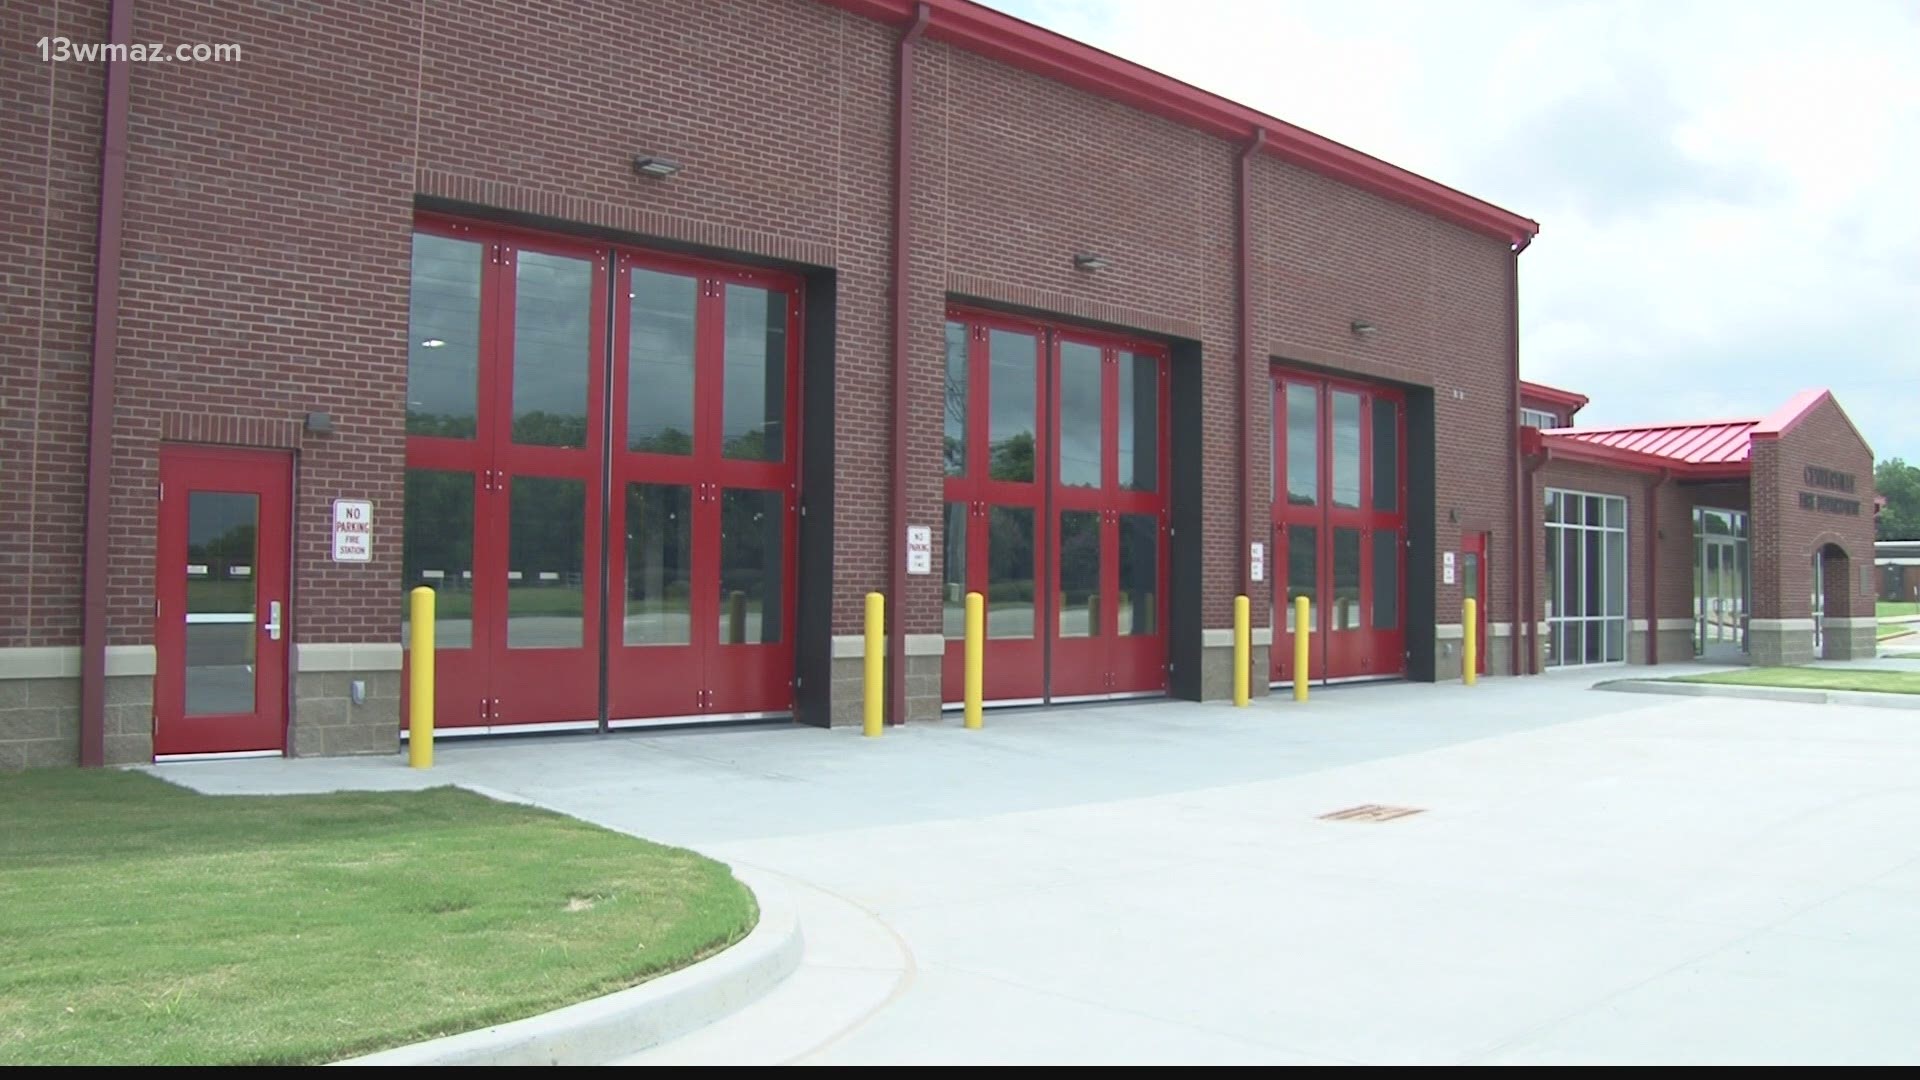 Within a few weeks, the Centerville Fire Department will have a new place to call home.